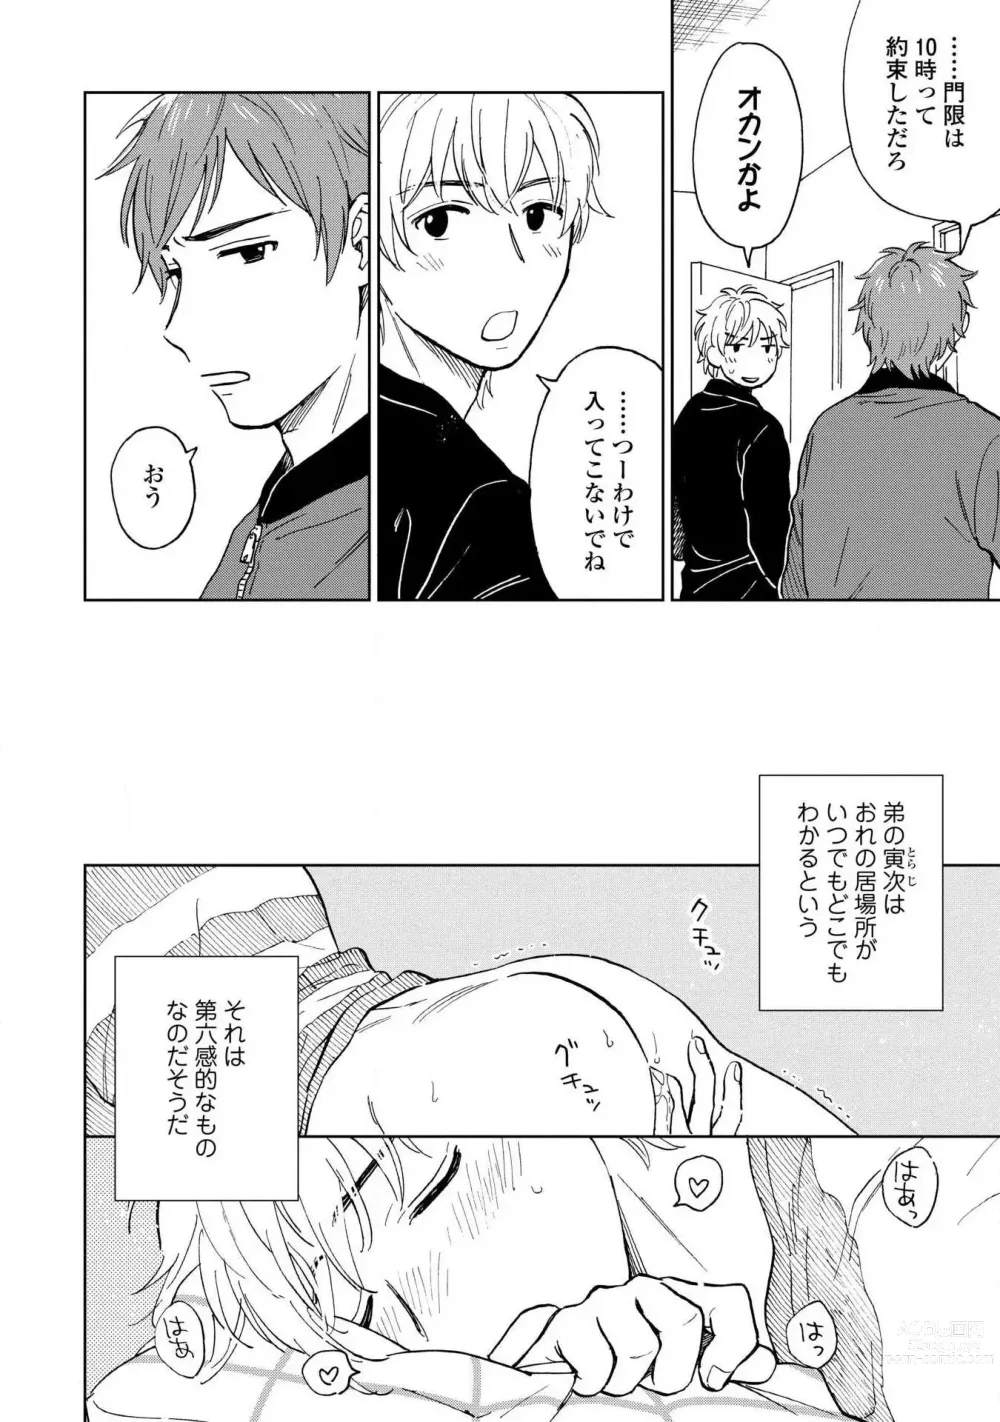 Page 10 of manga Magnet Kyoudai - Magnet Brothers